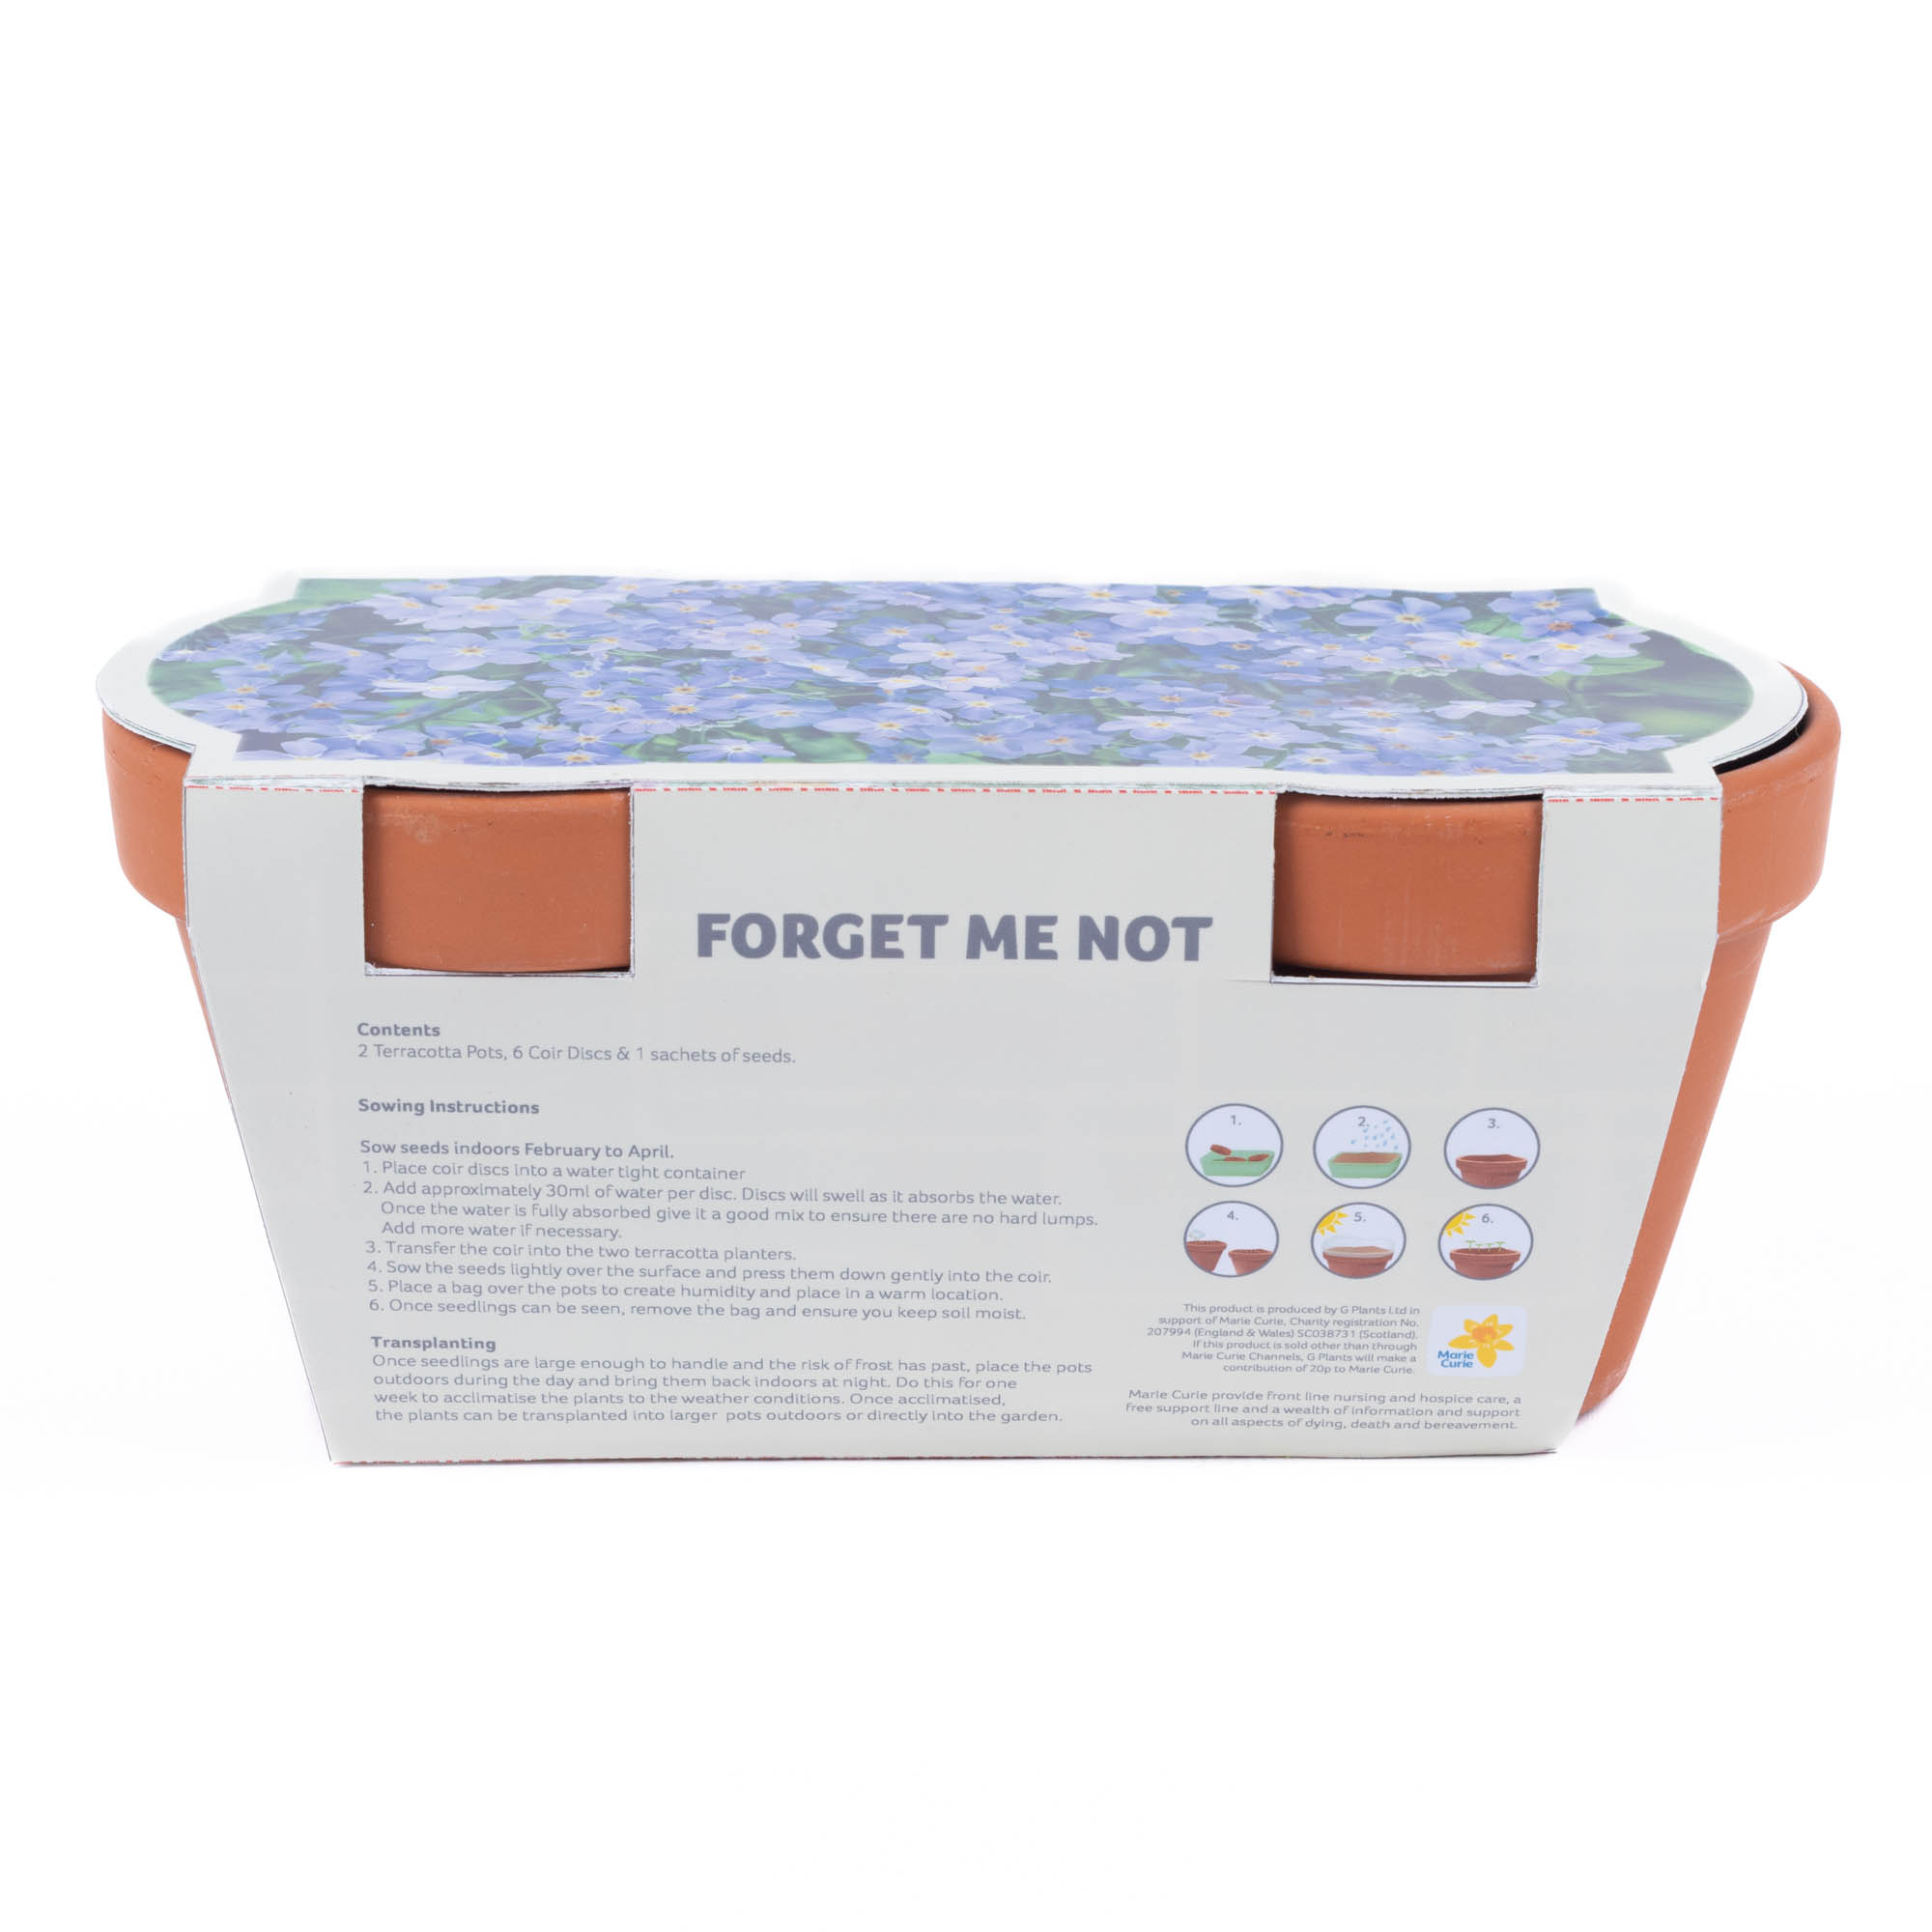 Marie Curie Forget Me Nots Grow Kit     